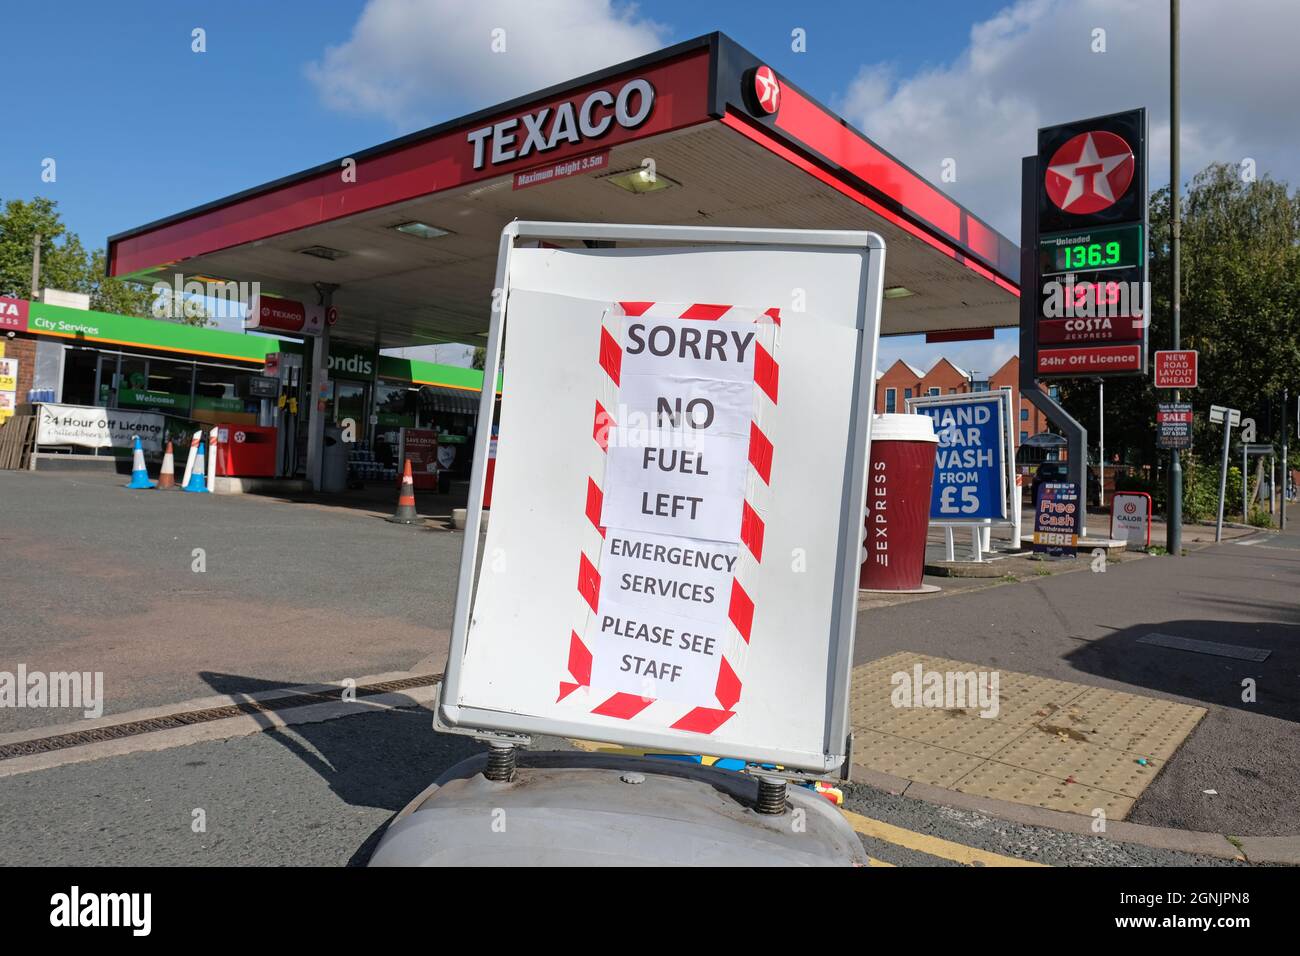 Hereford, Herefordshire, UK - Sunday 26th September 2021 - Fuel shortages continue with no fuel available at the Texaco petrol station in Hereford at 12.00 Noon today with an exception for the Emergency Services - Photo Steven May / Alamy Live News Stock Photo